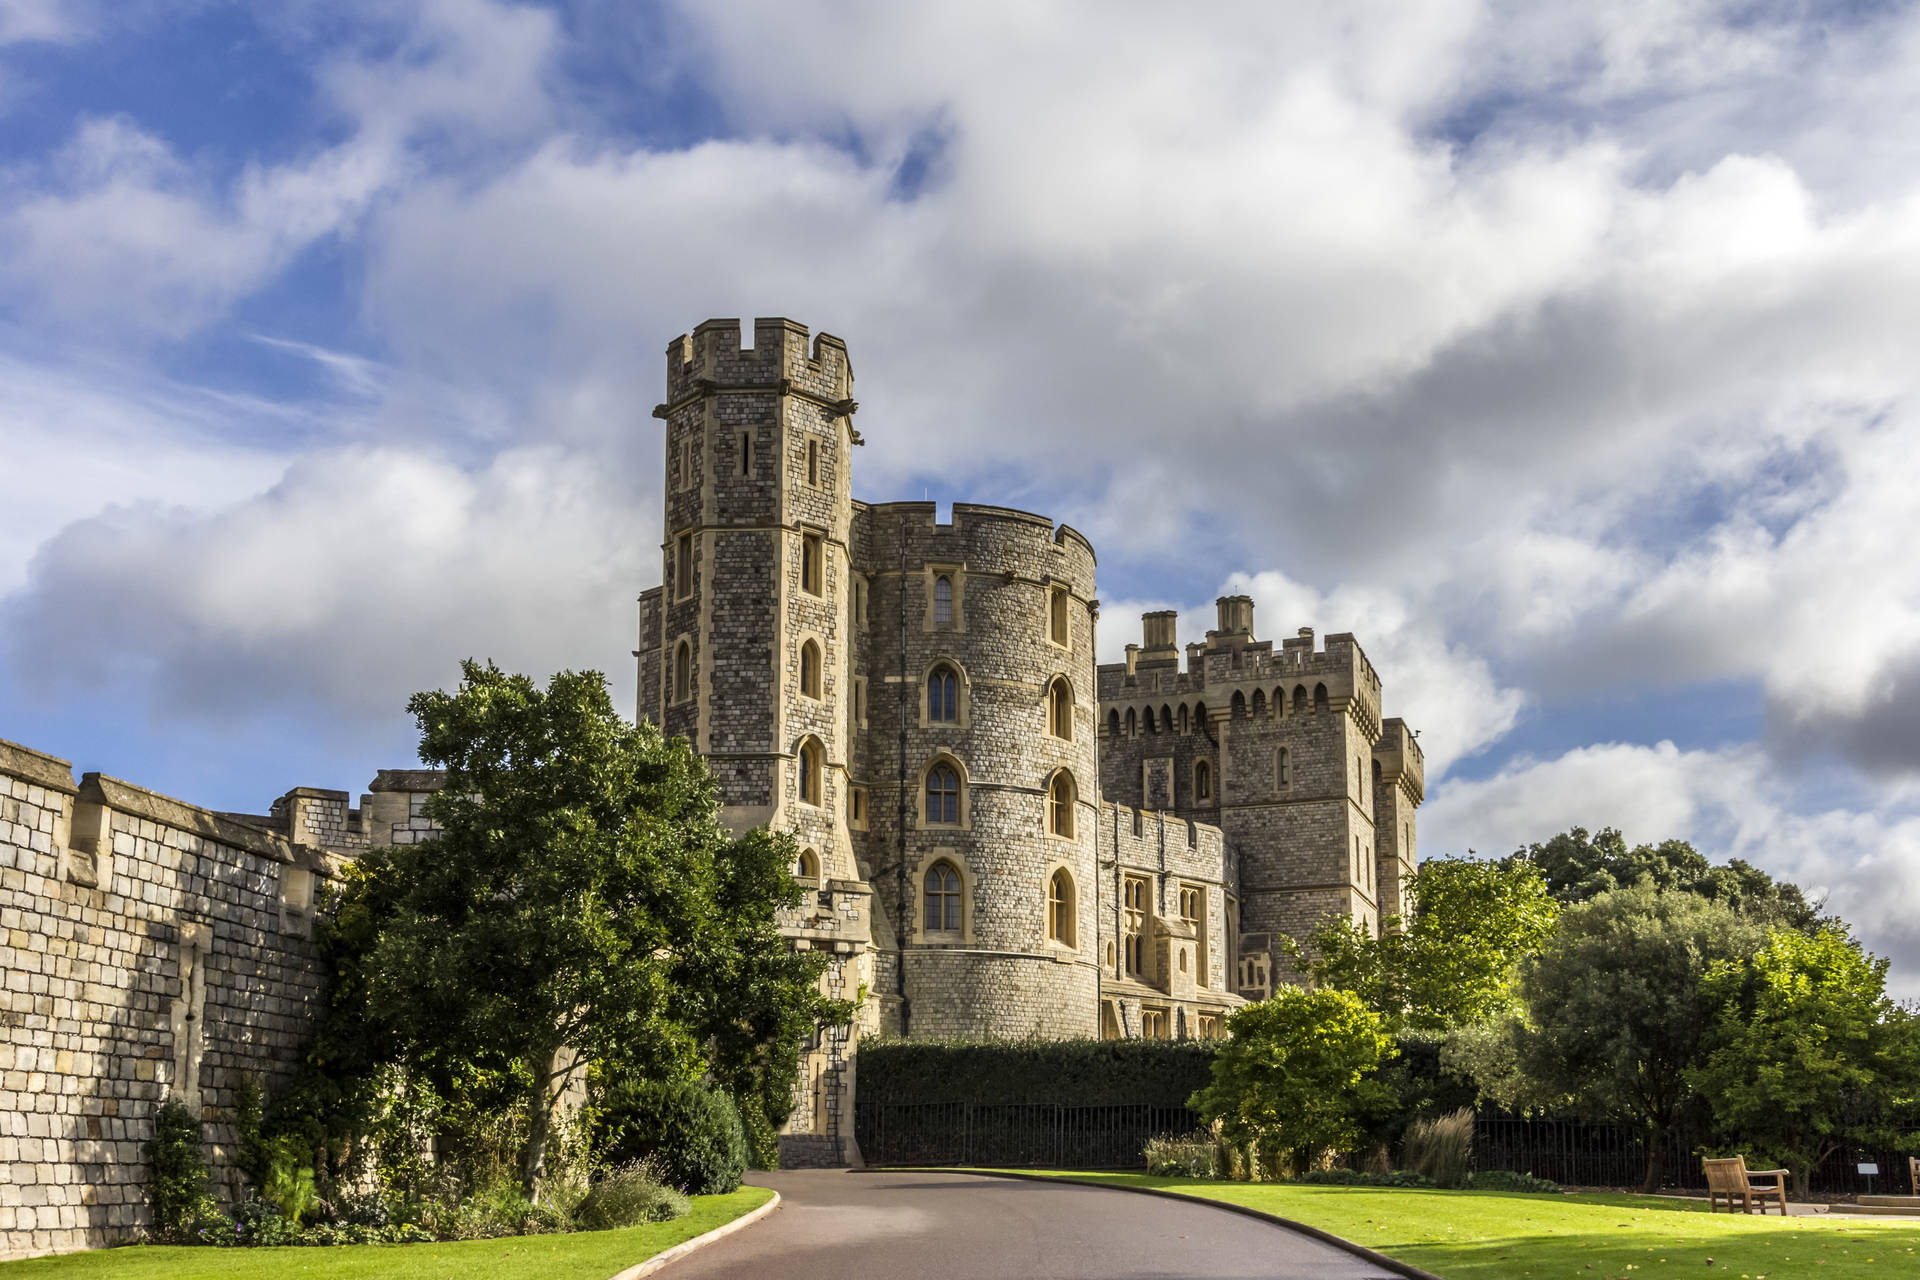 Caption: Majestic Windsor Castle Nestled Among Lush Greenery Against A Dramatic Cloudy Sky Wallpaper